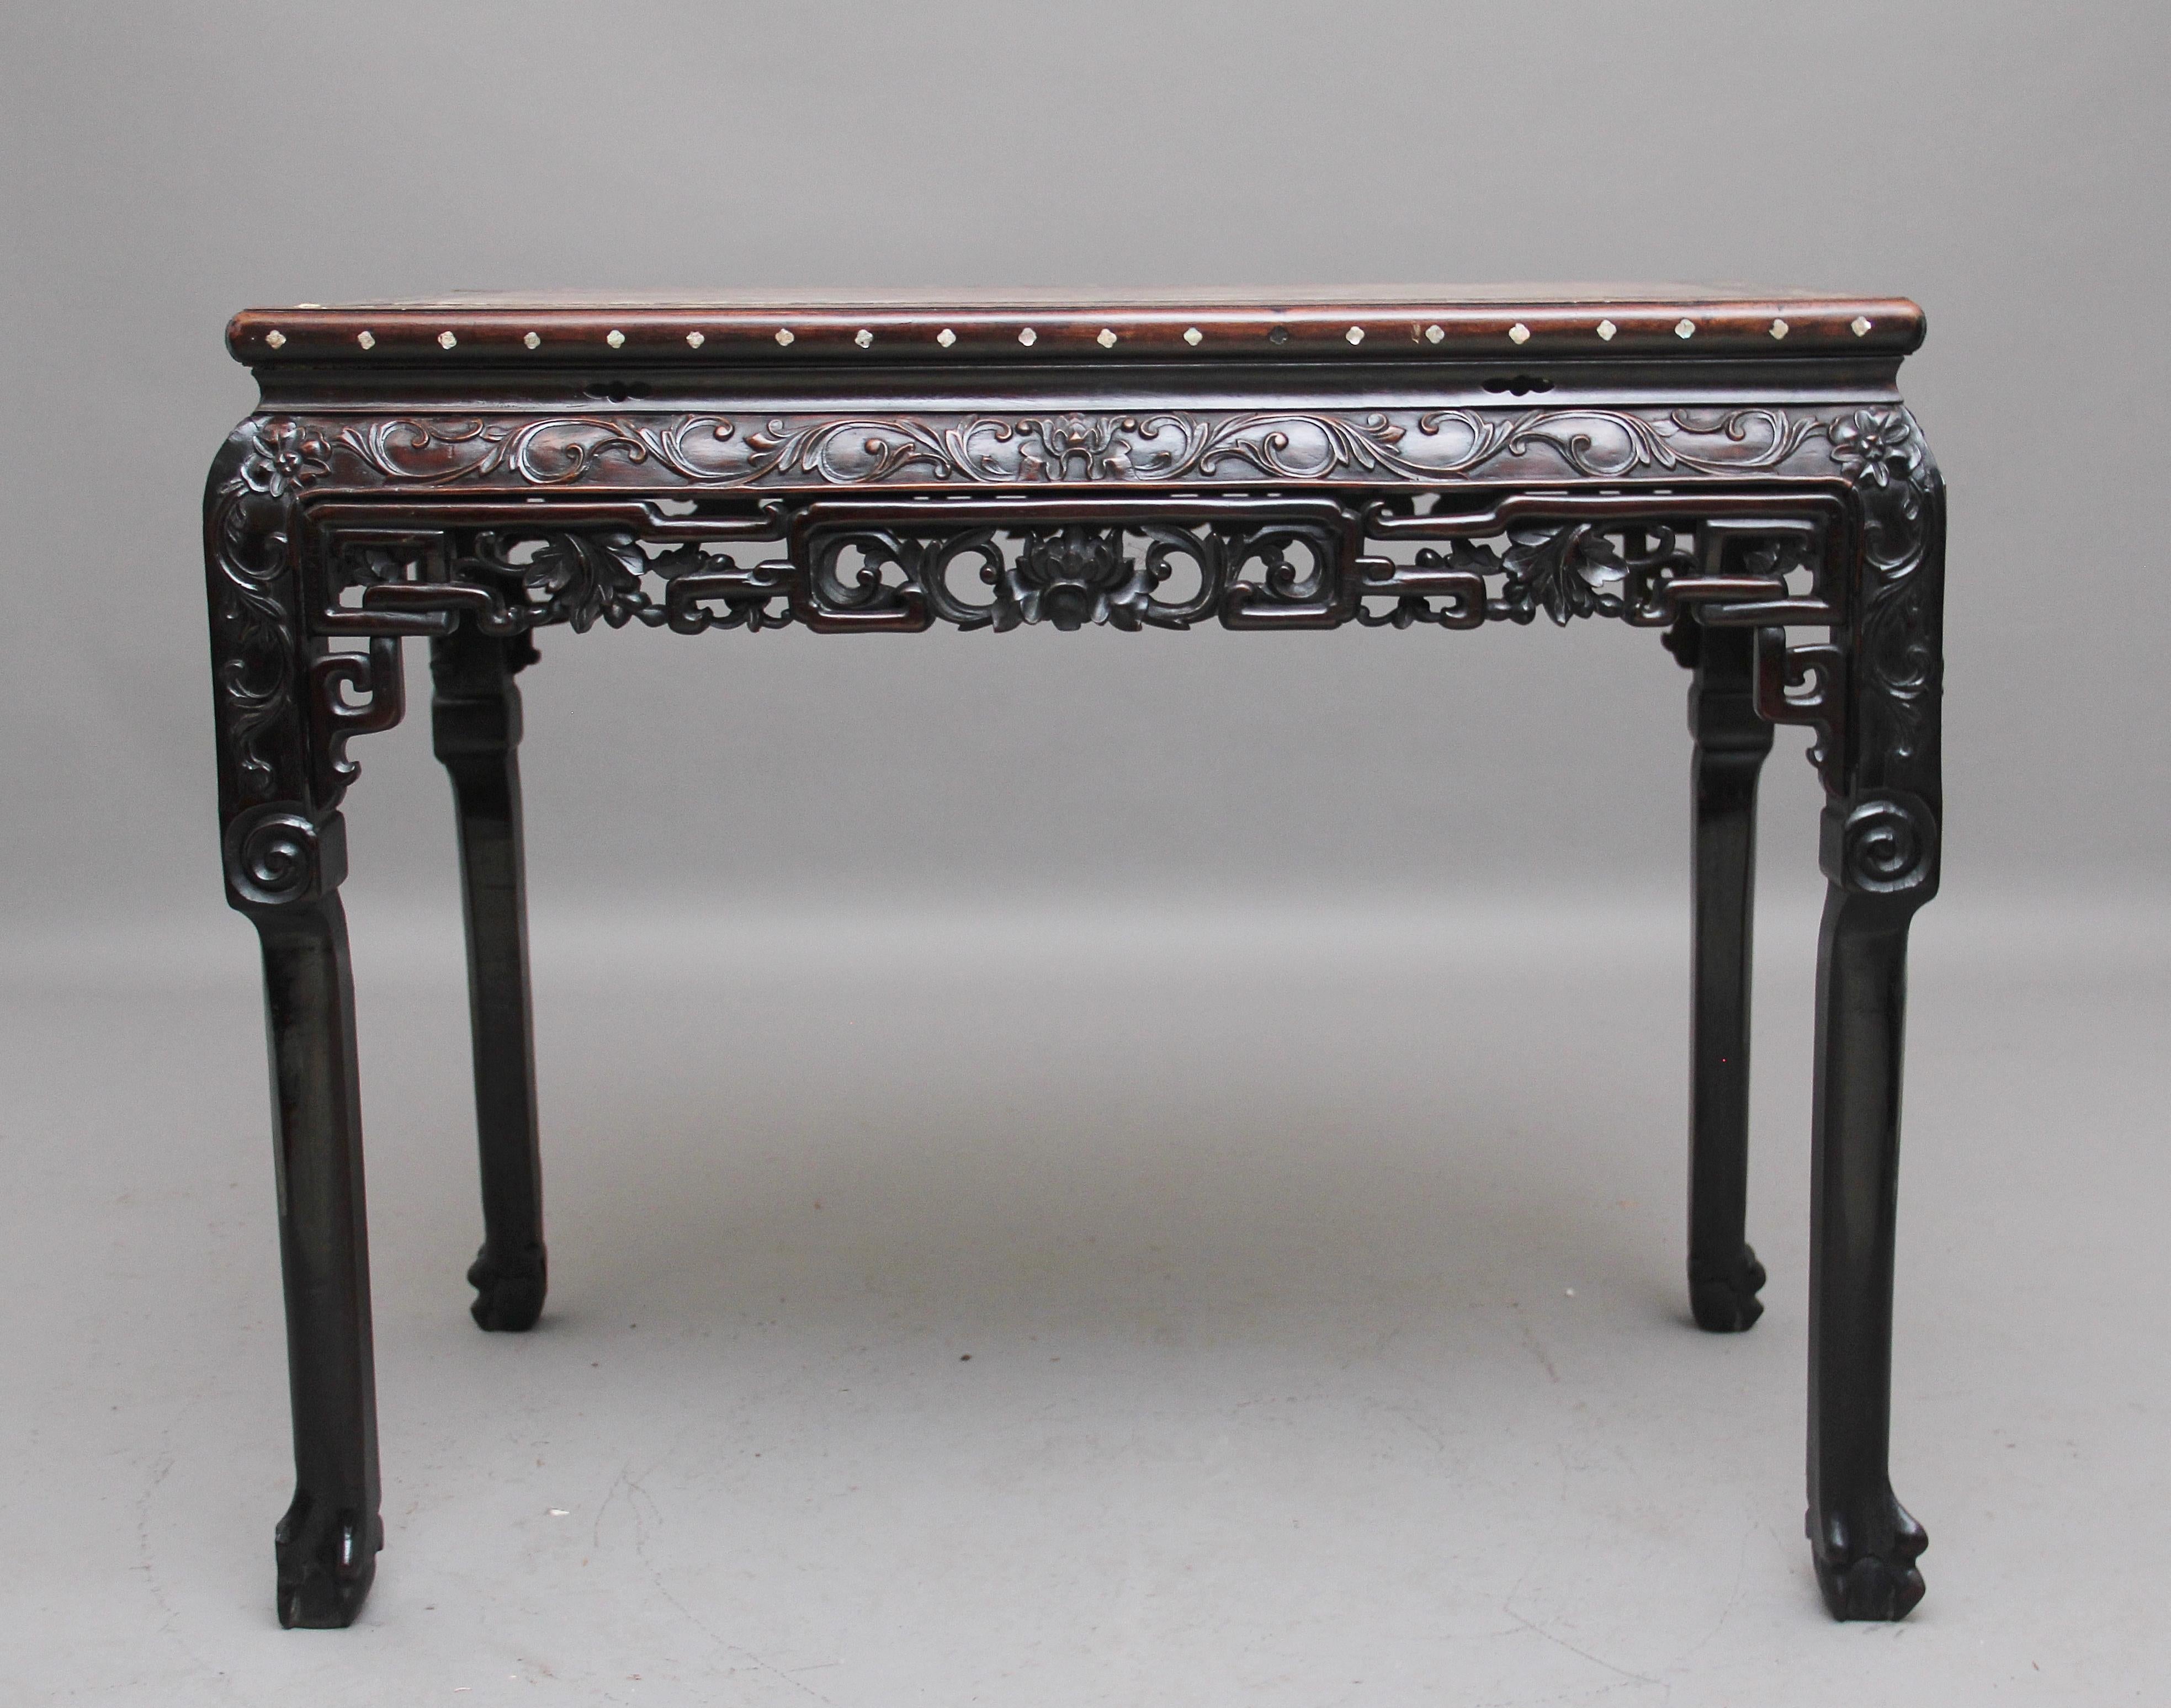 A superb quality freestanding early 19th century Chinese marble top side / centre table, the rectangular top inset with a rouge marble panel, the hardwood border of the top profusely inlaid with mother of pearl floral patterns, there is also mother